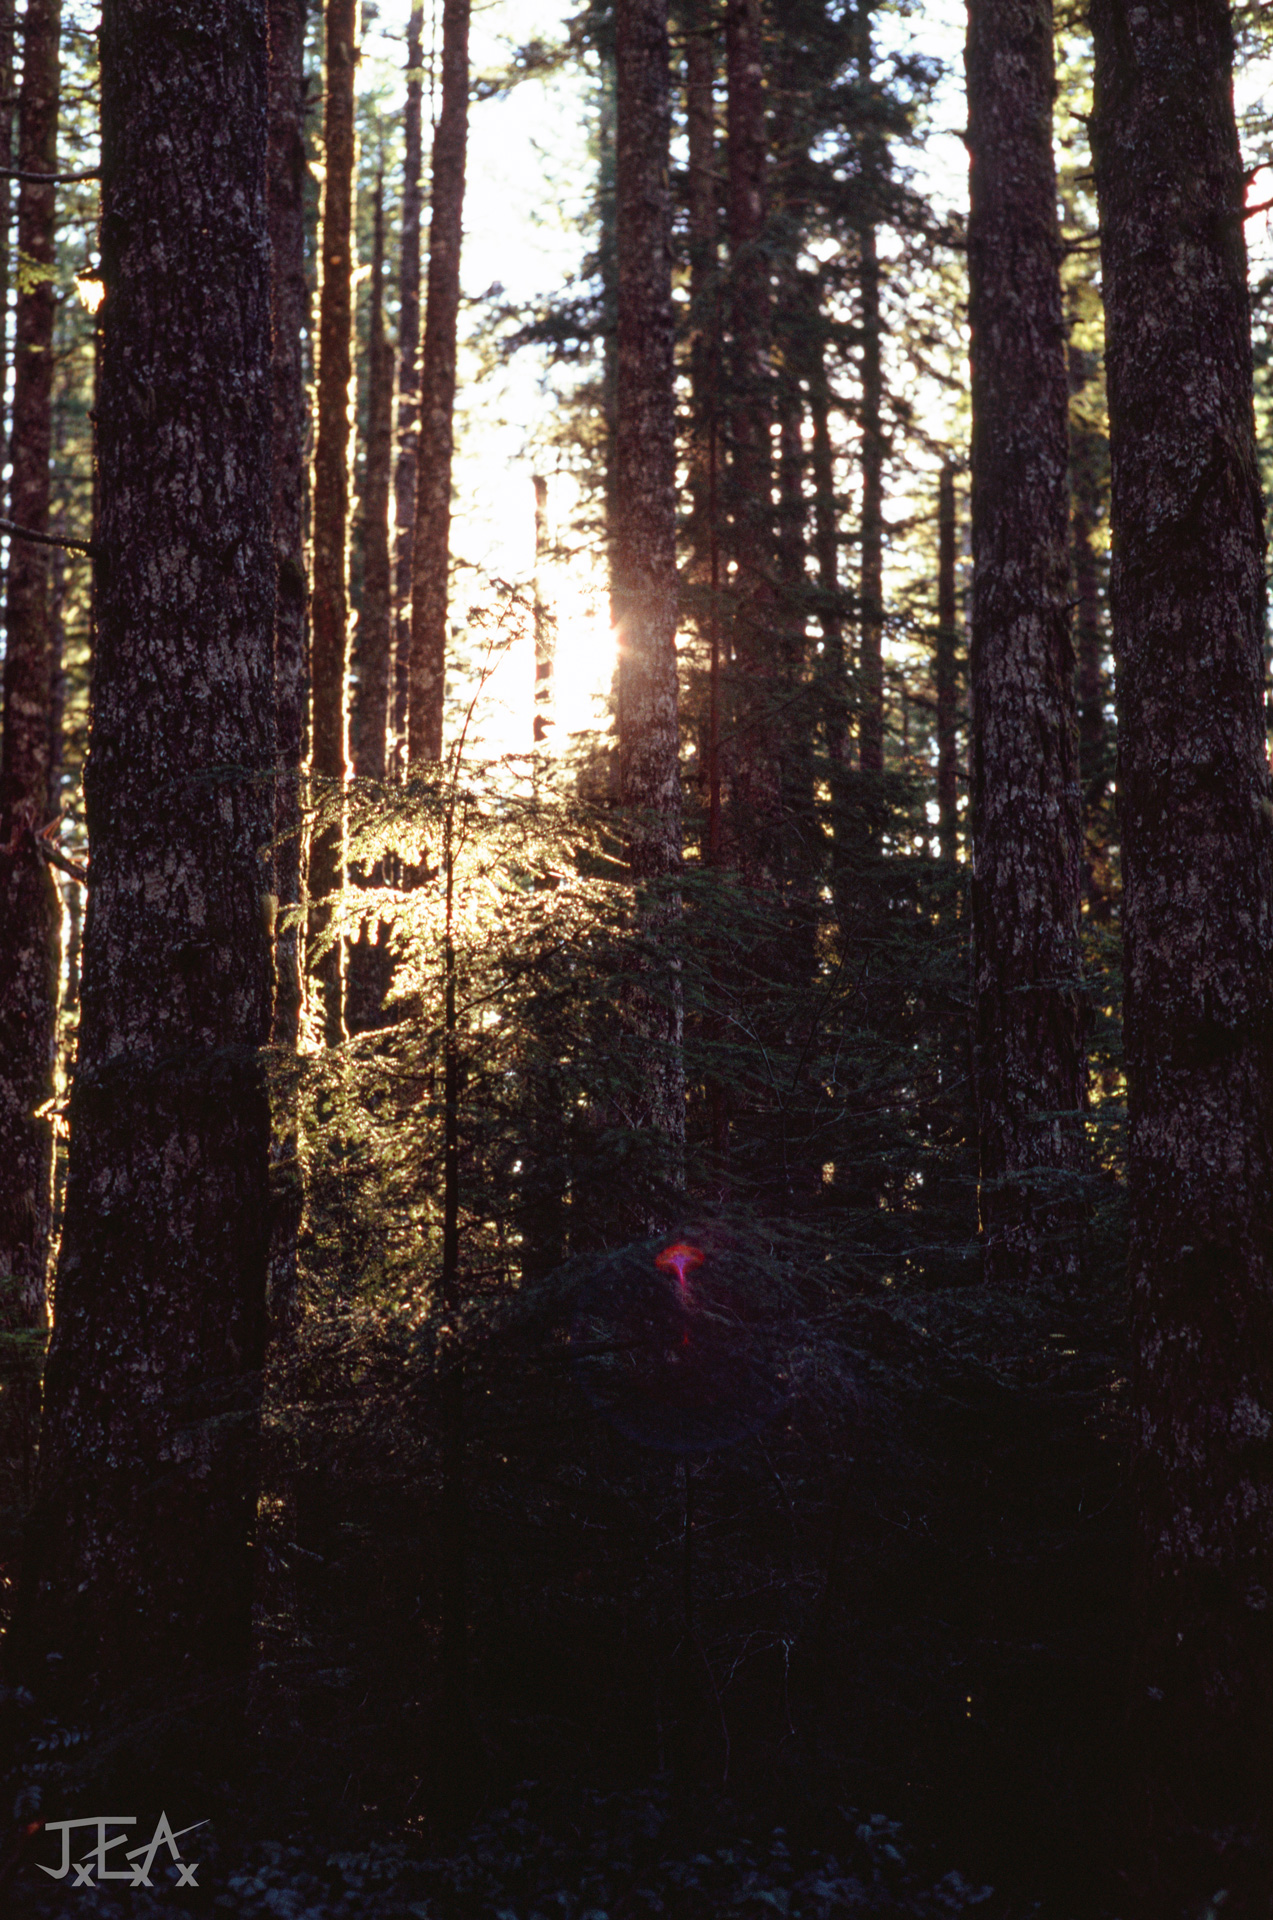 A shot of the sun shining through a dense Pacific Northwest evergreen forest.